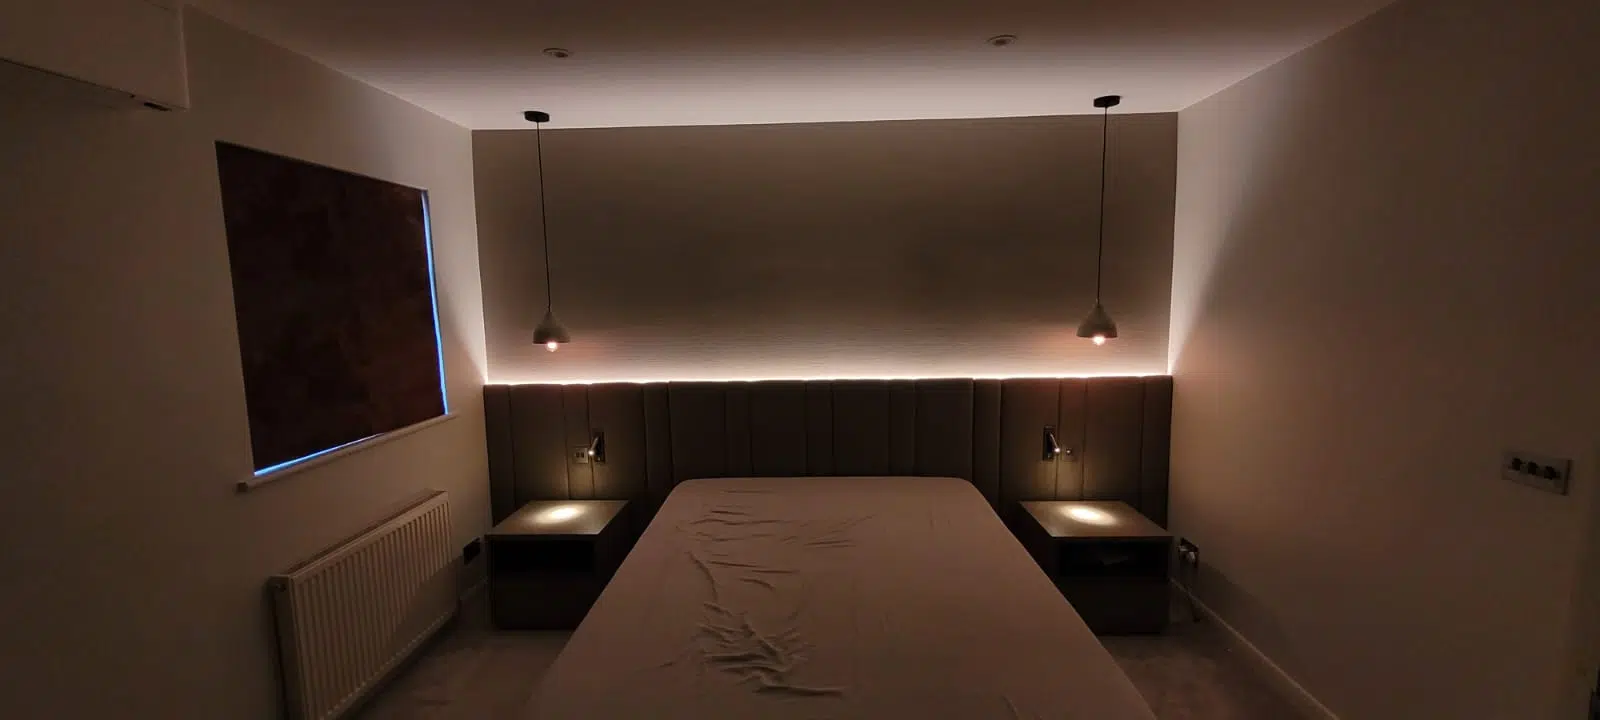 Bespoke lighting design and installation in a property in London